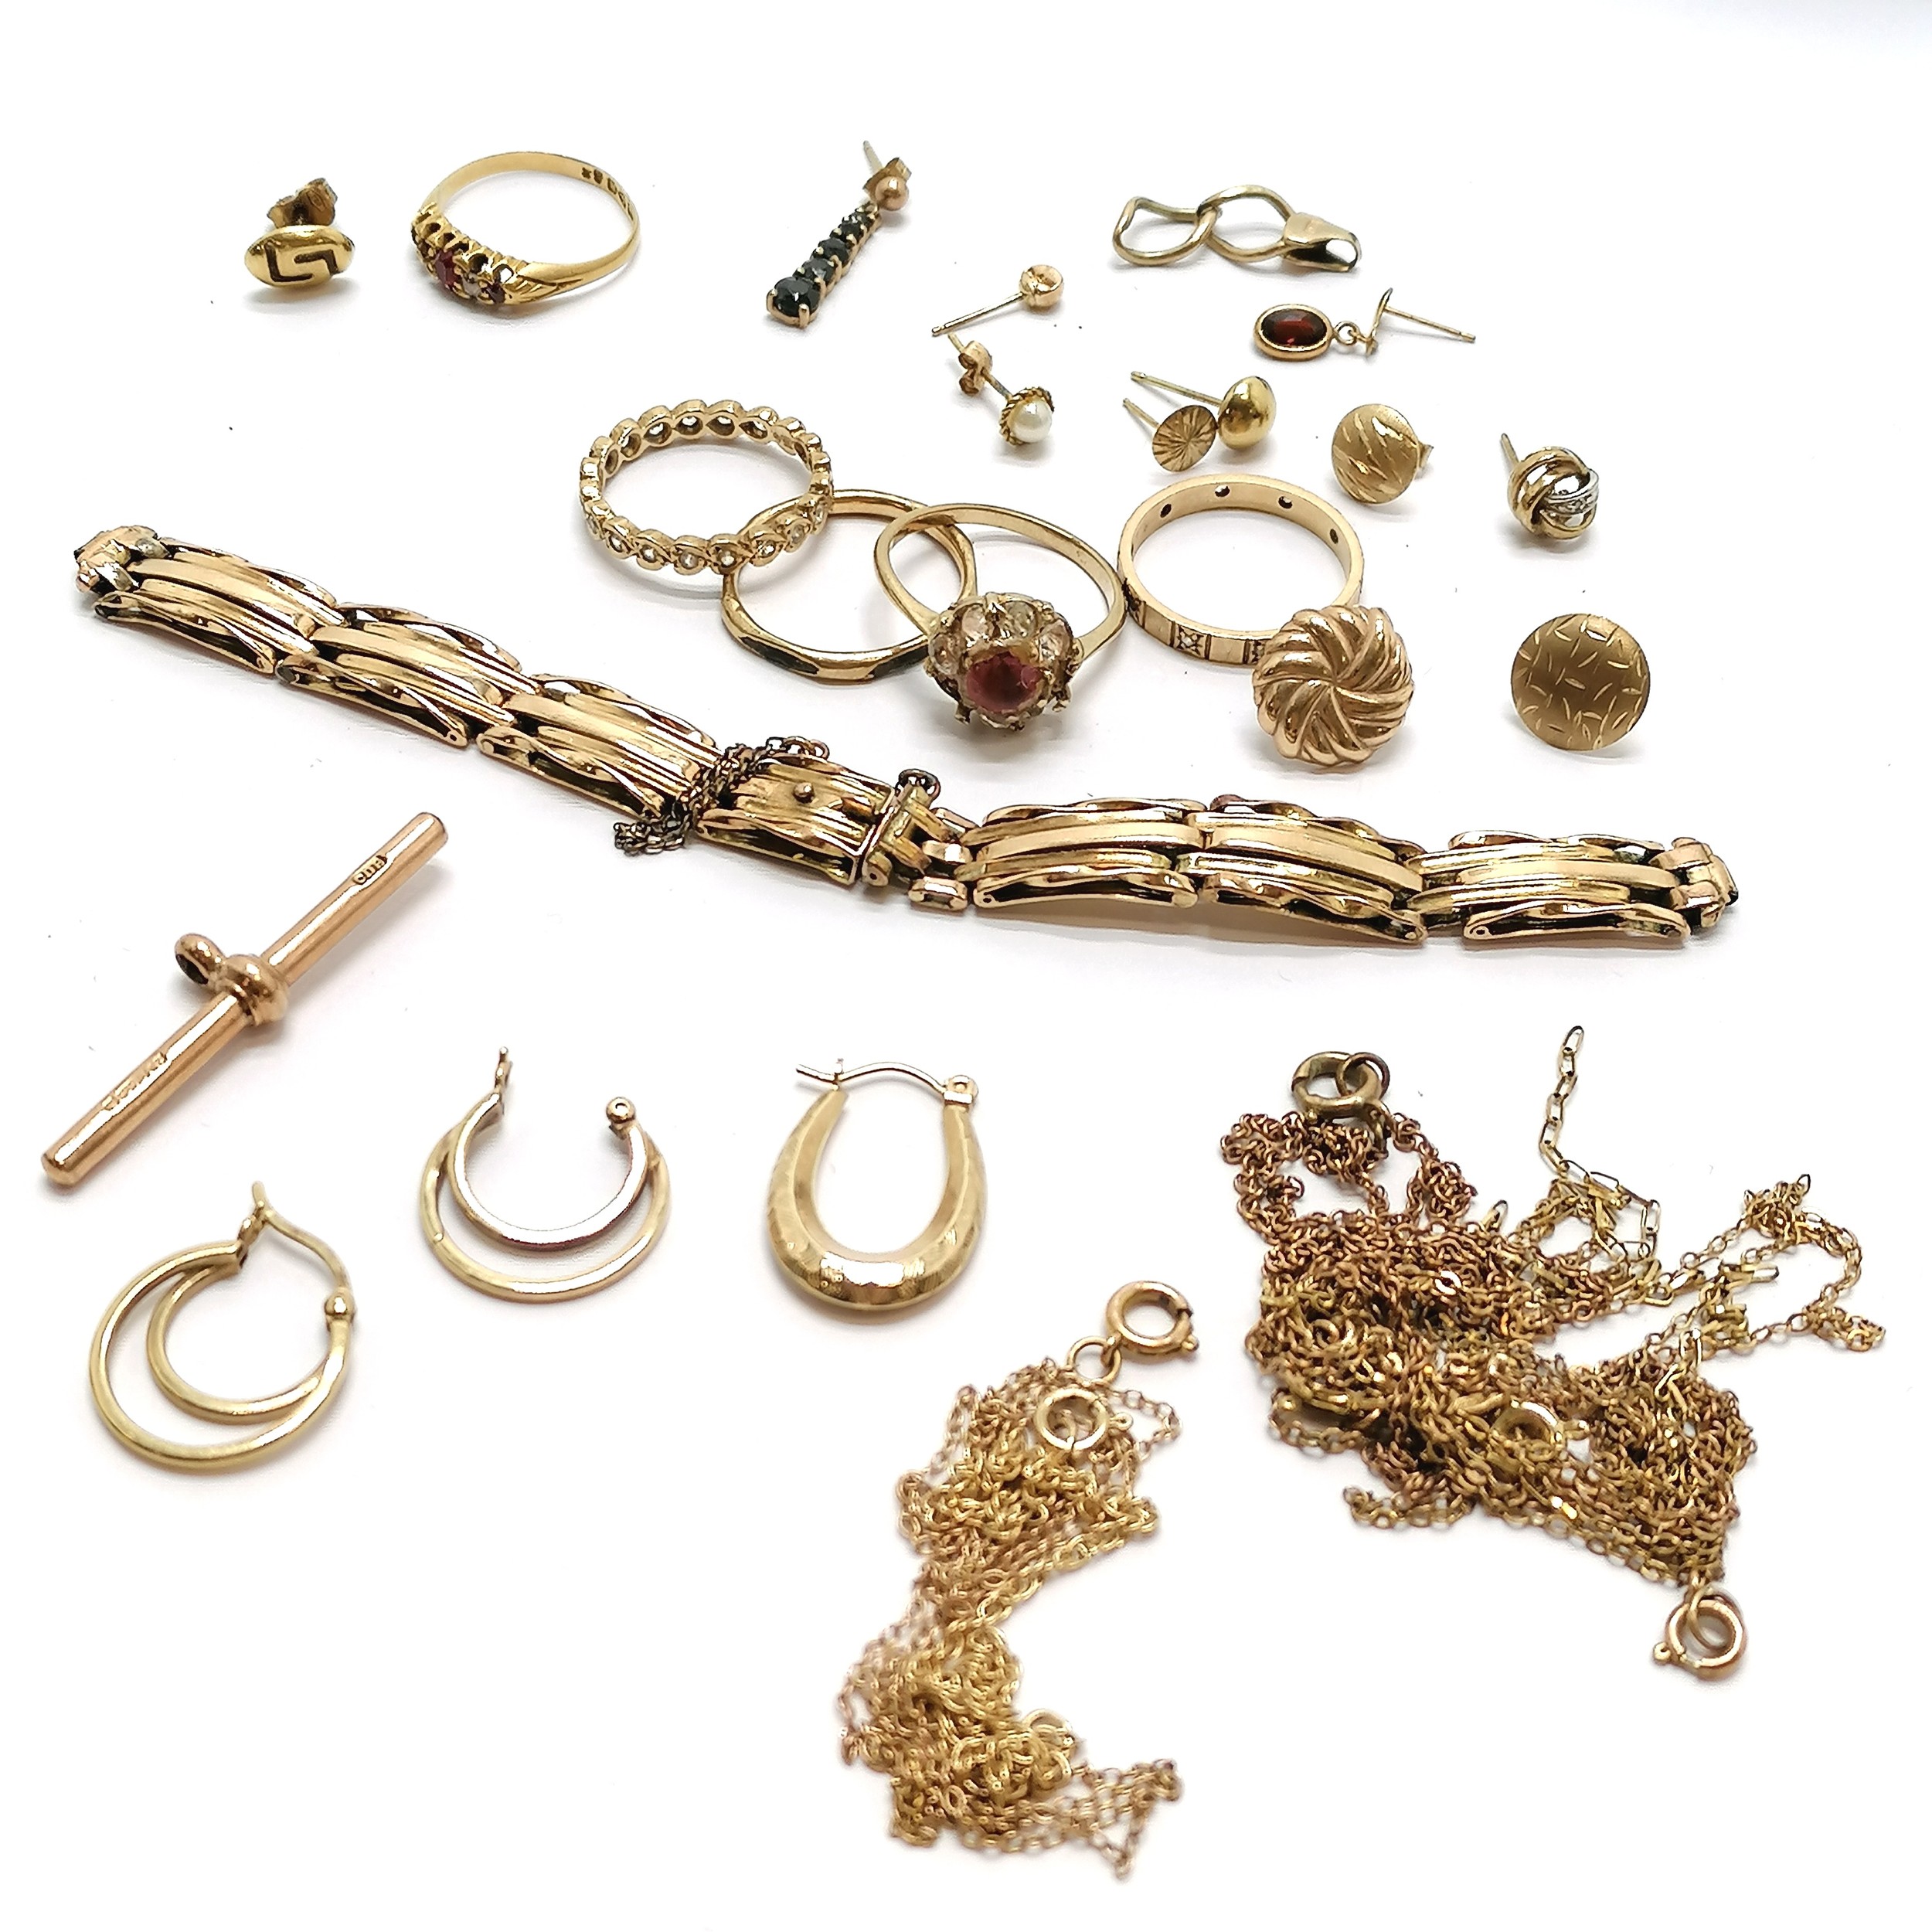 Qty of scrap gold inc unmarked sprung watch bracelet, stone set rings, pendant etc - total weight